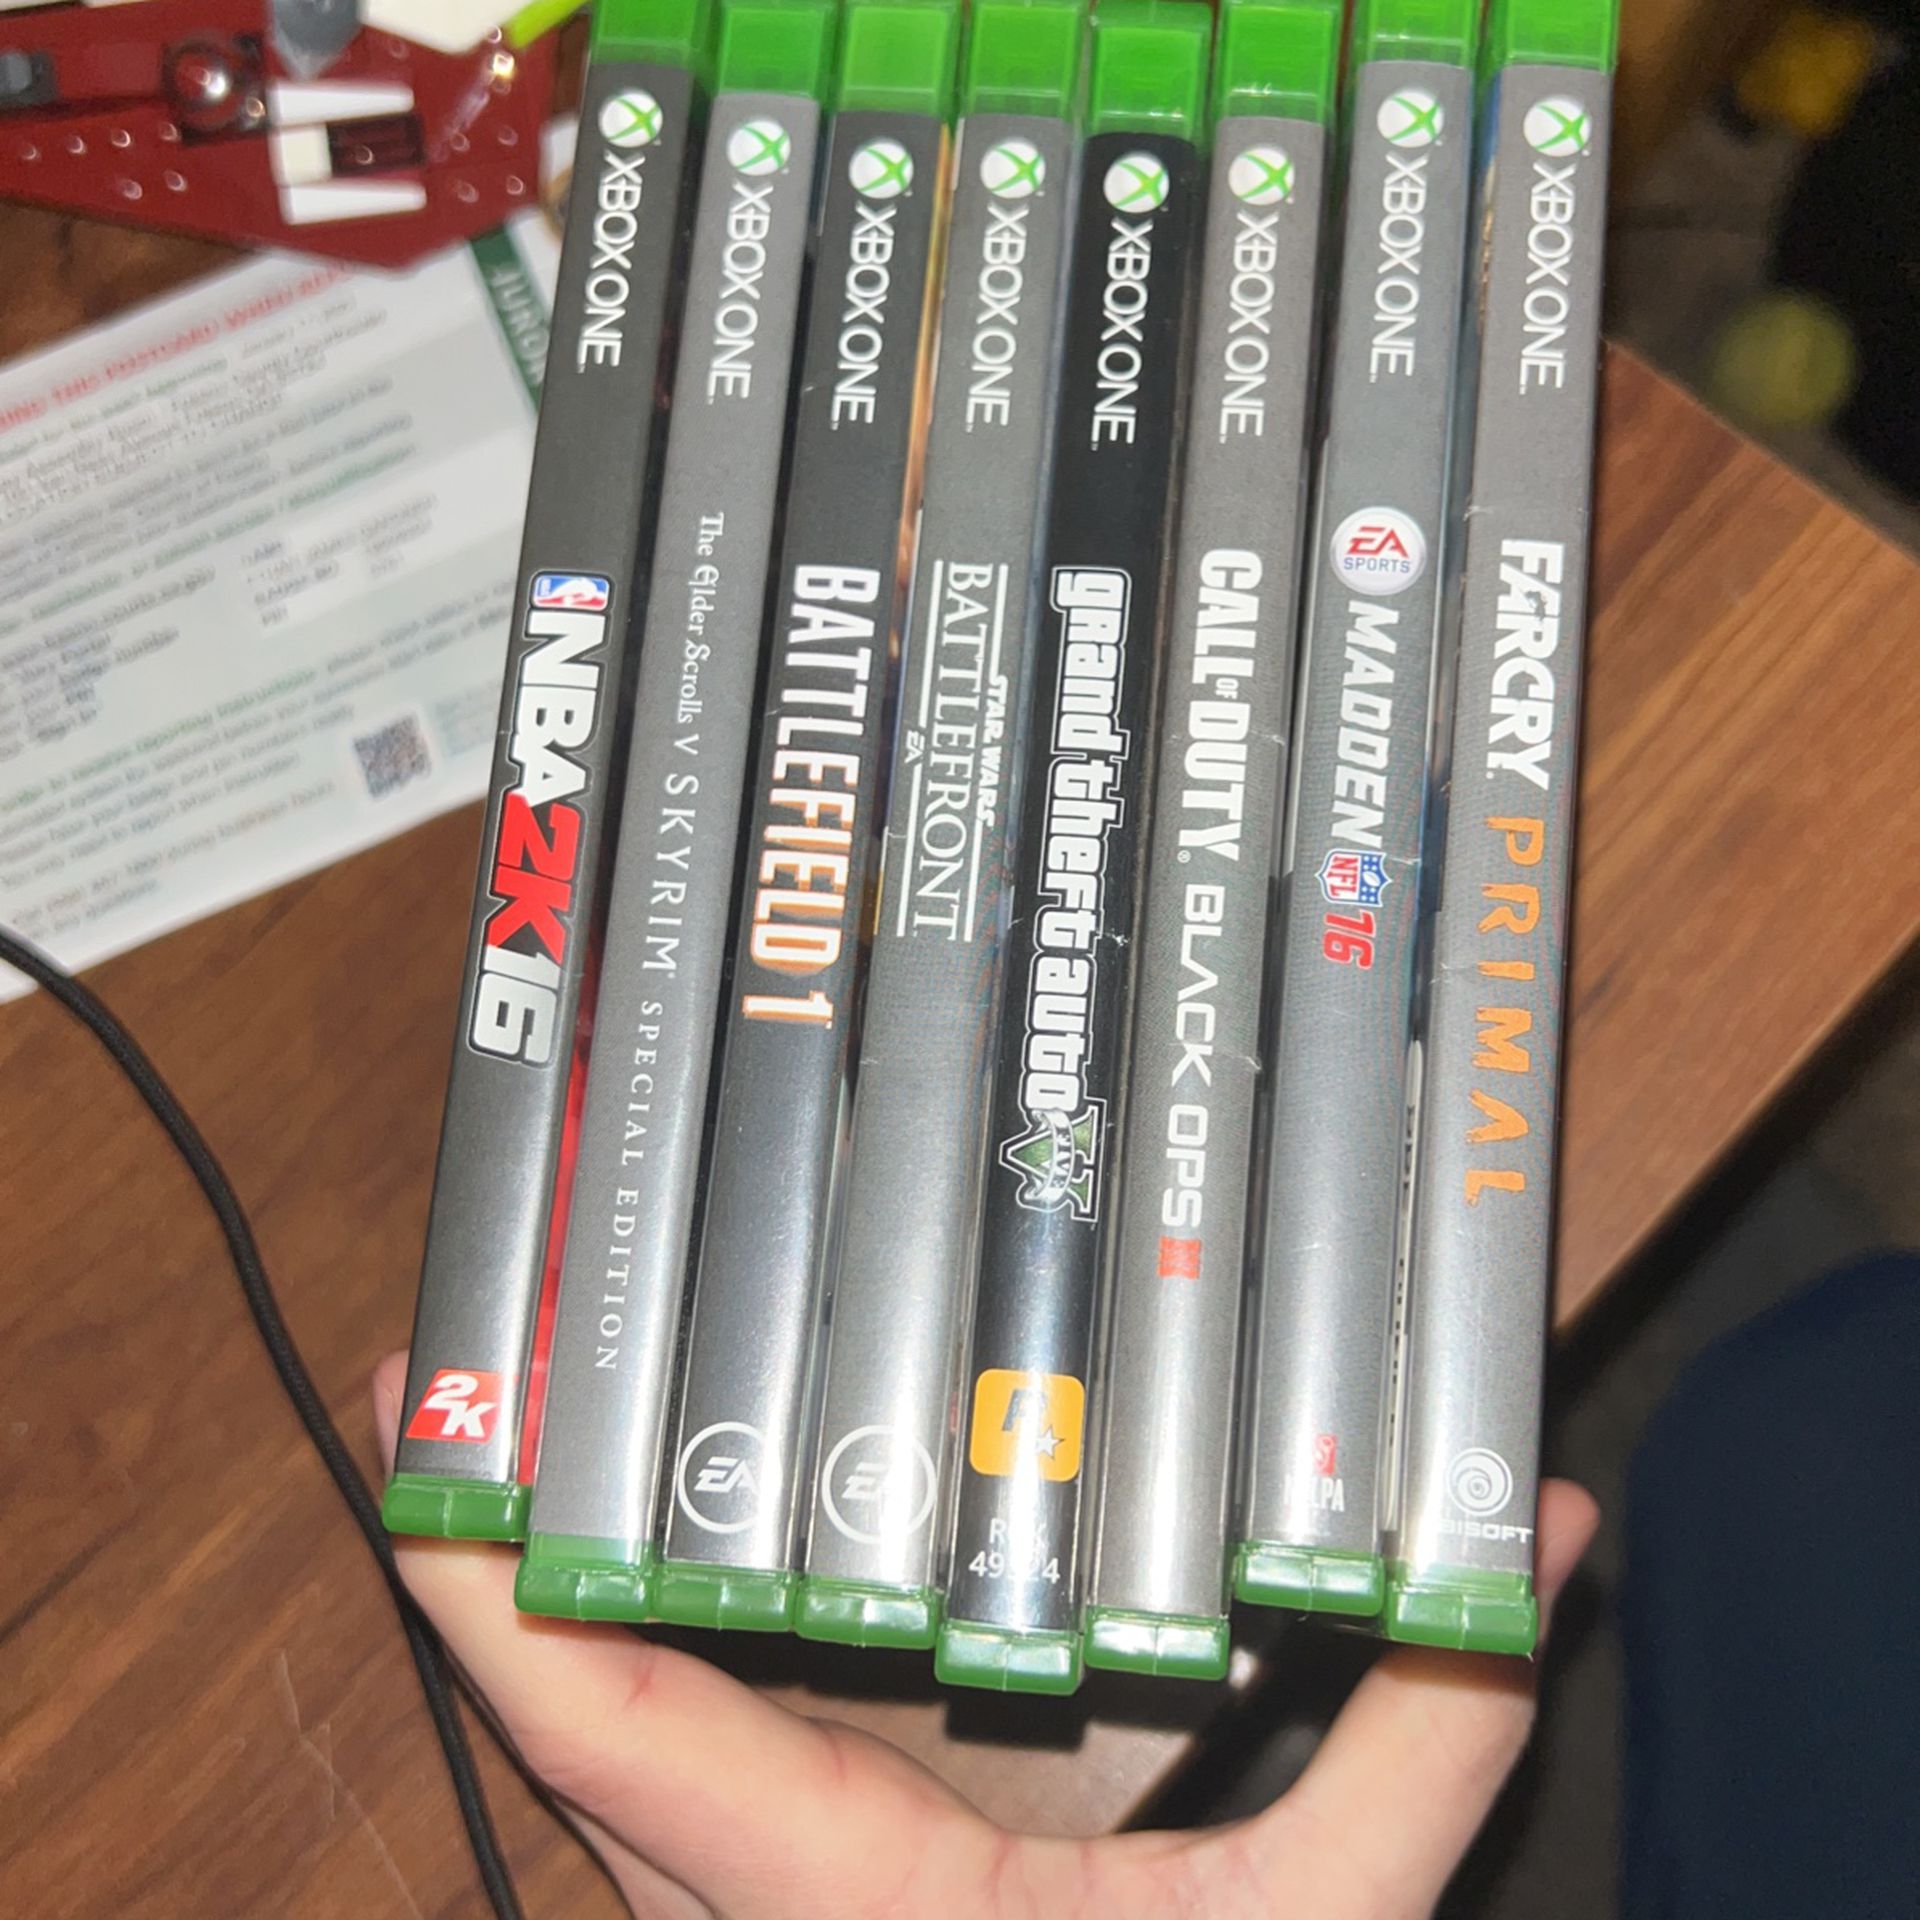 Call Of Duty Black Ops 2 Xbox 360 for Sale in Fresno, CA - OfferUp